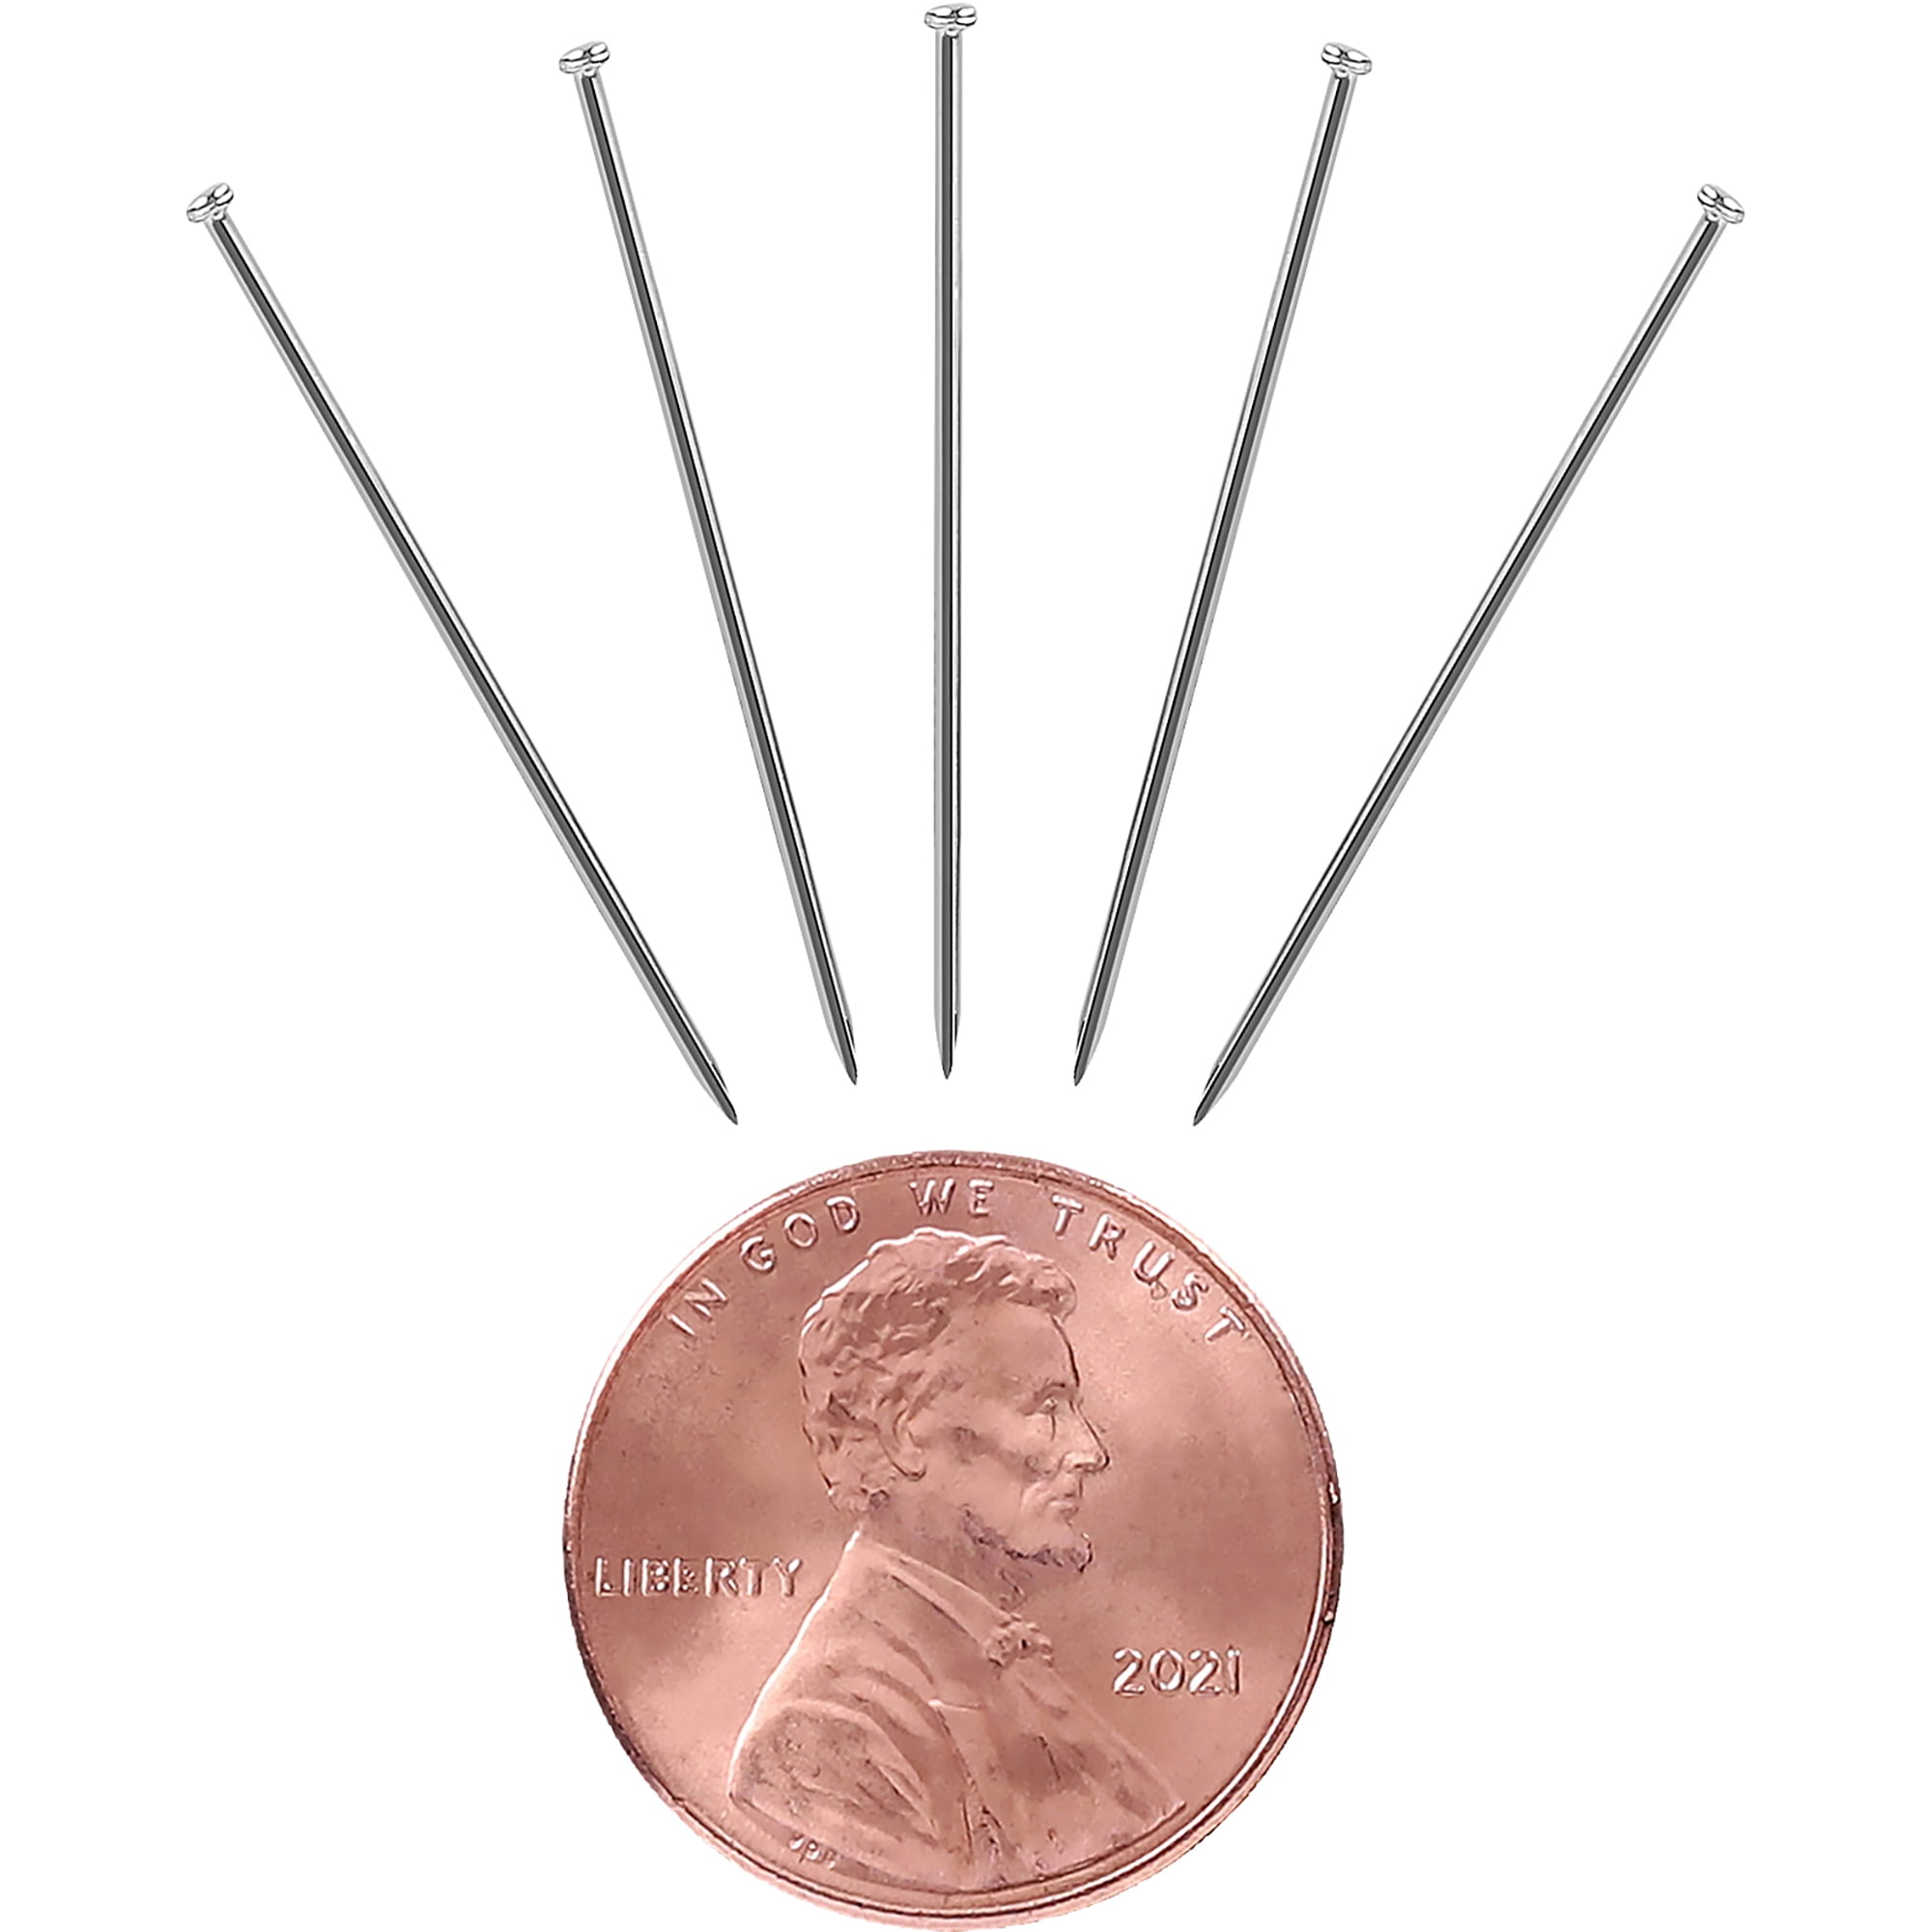 7pcs Super Fine Beading Needles, Beading Pins For Jewelry Making,  Embroidery, Hand Sewing